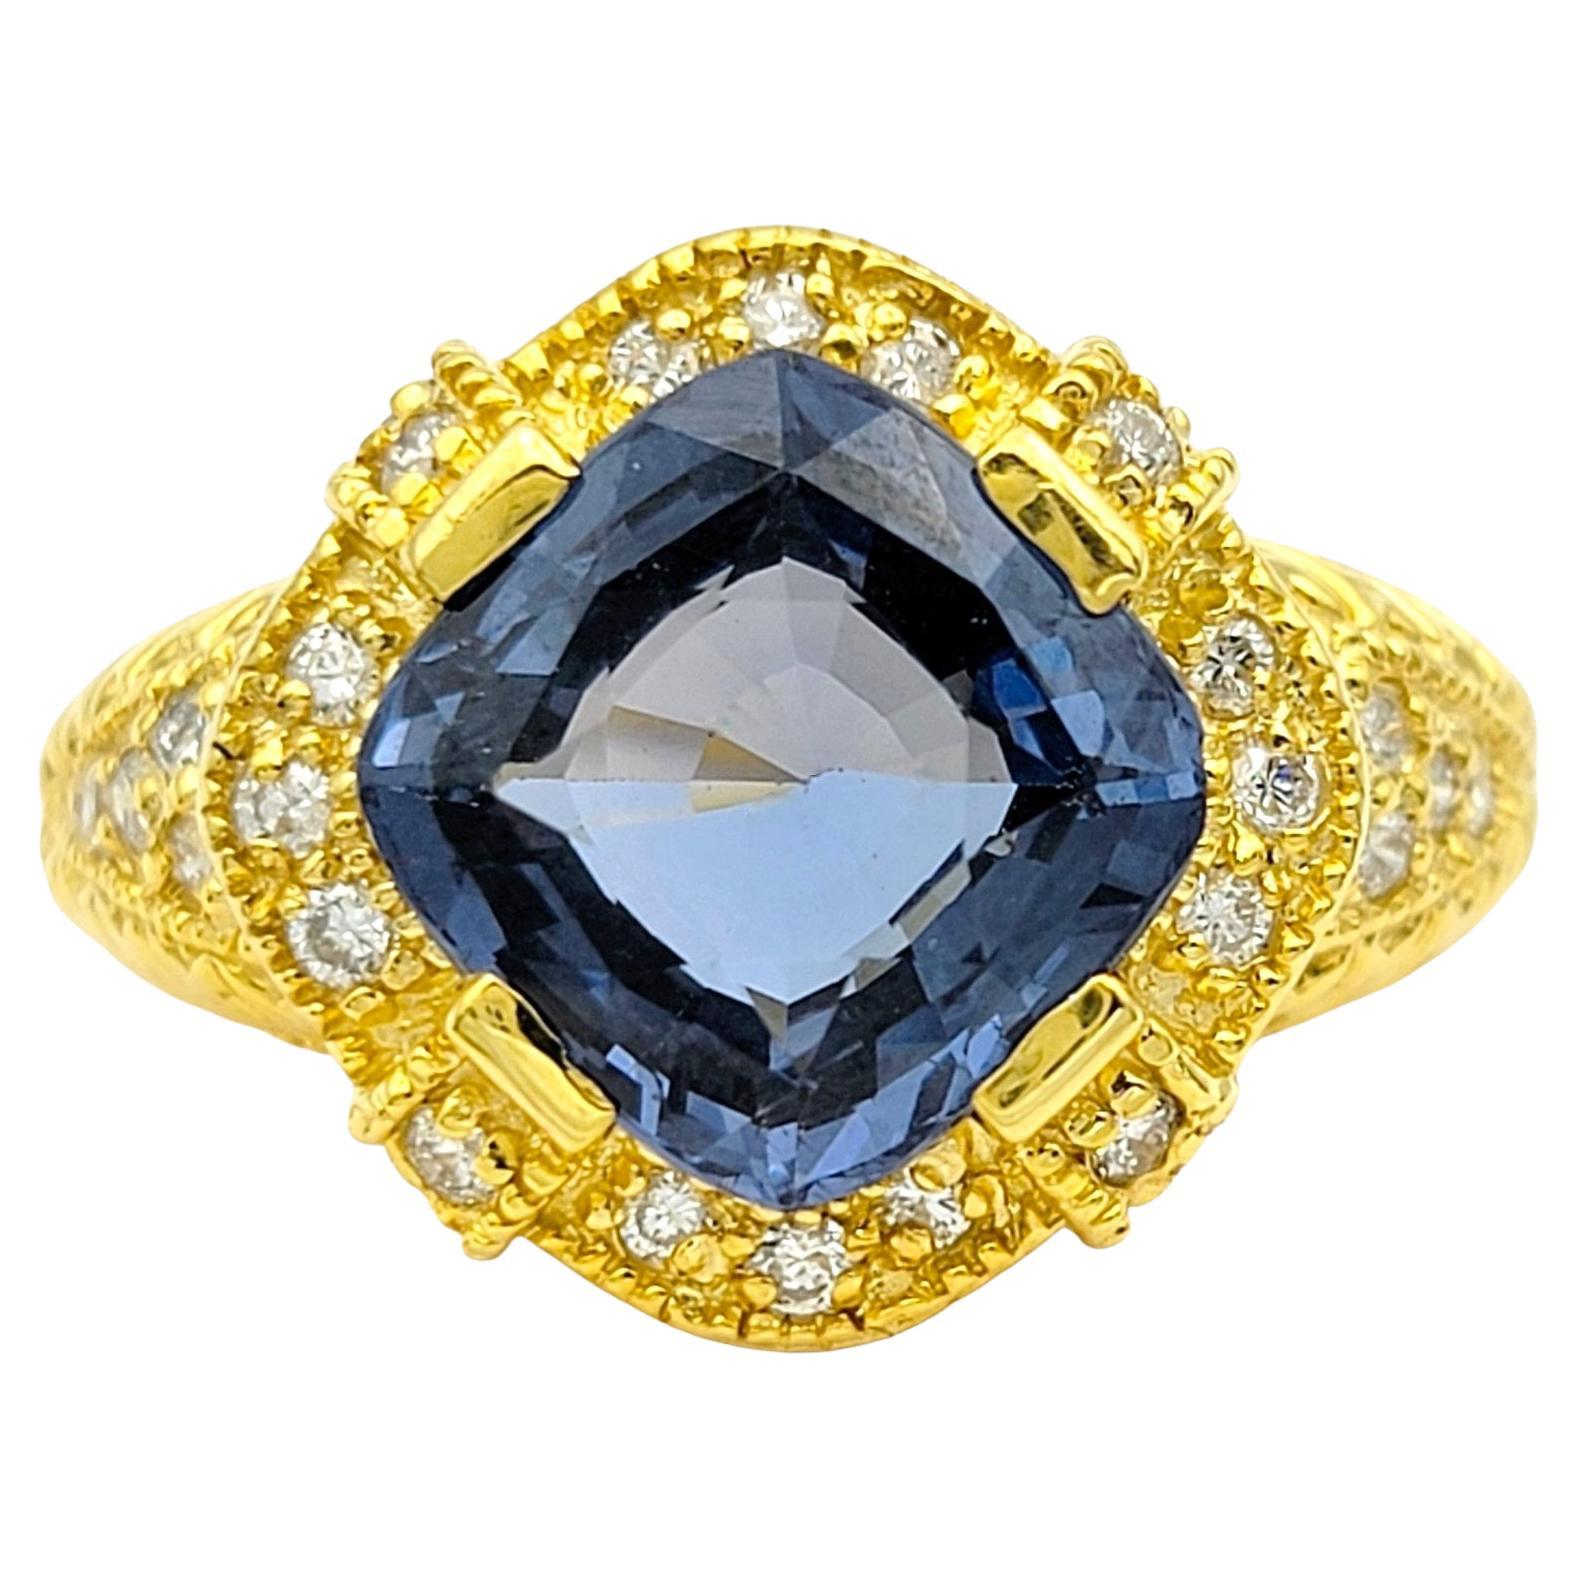 Cushion Cut Blue Spinel and Diamond Halo Cocktail Ring in 18 Karat Yellow Gold